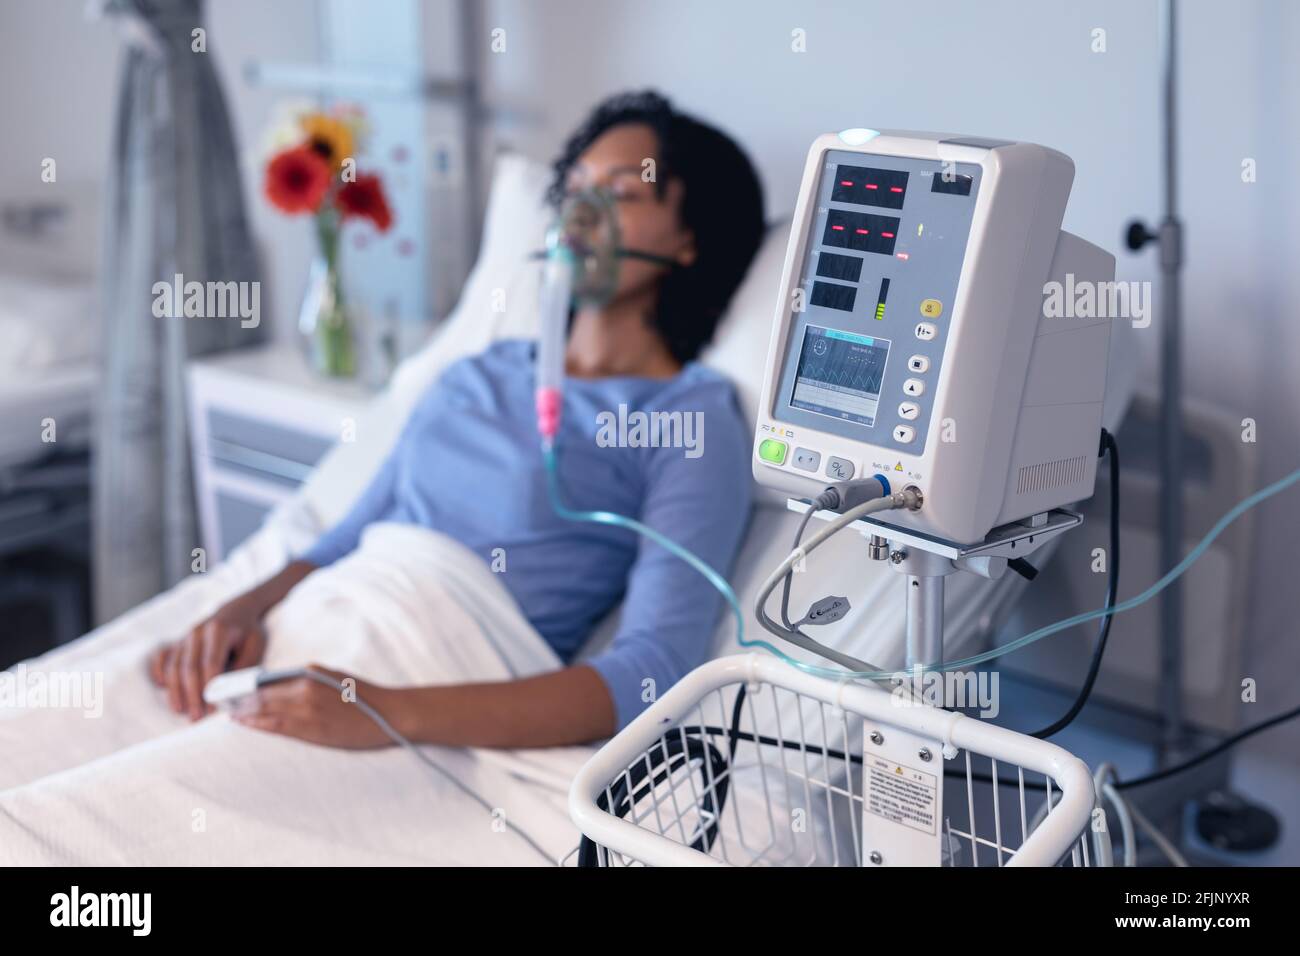 https://c8.alamy.com/comp/2FJNYXR/ventilator-monitor-and-african-american-female-patient-in-hospital-bed-with-oxygen-ventilator-2FJNYXR.jpg